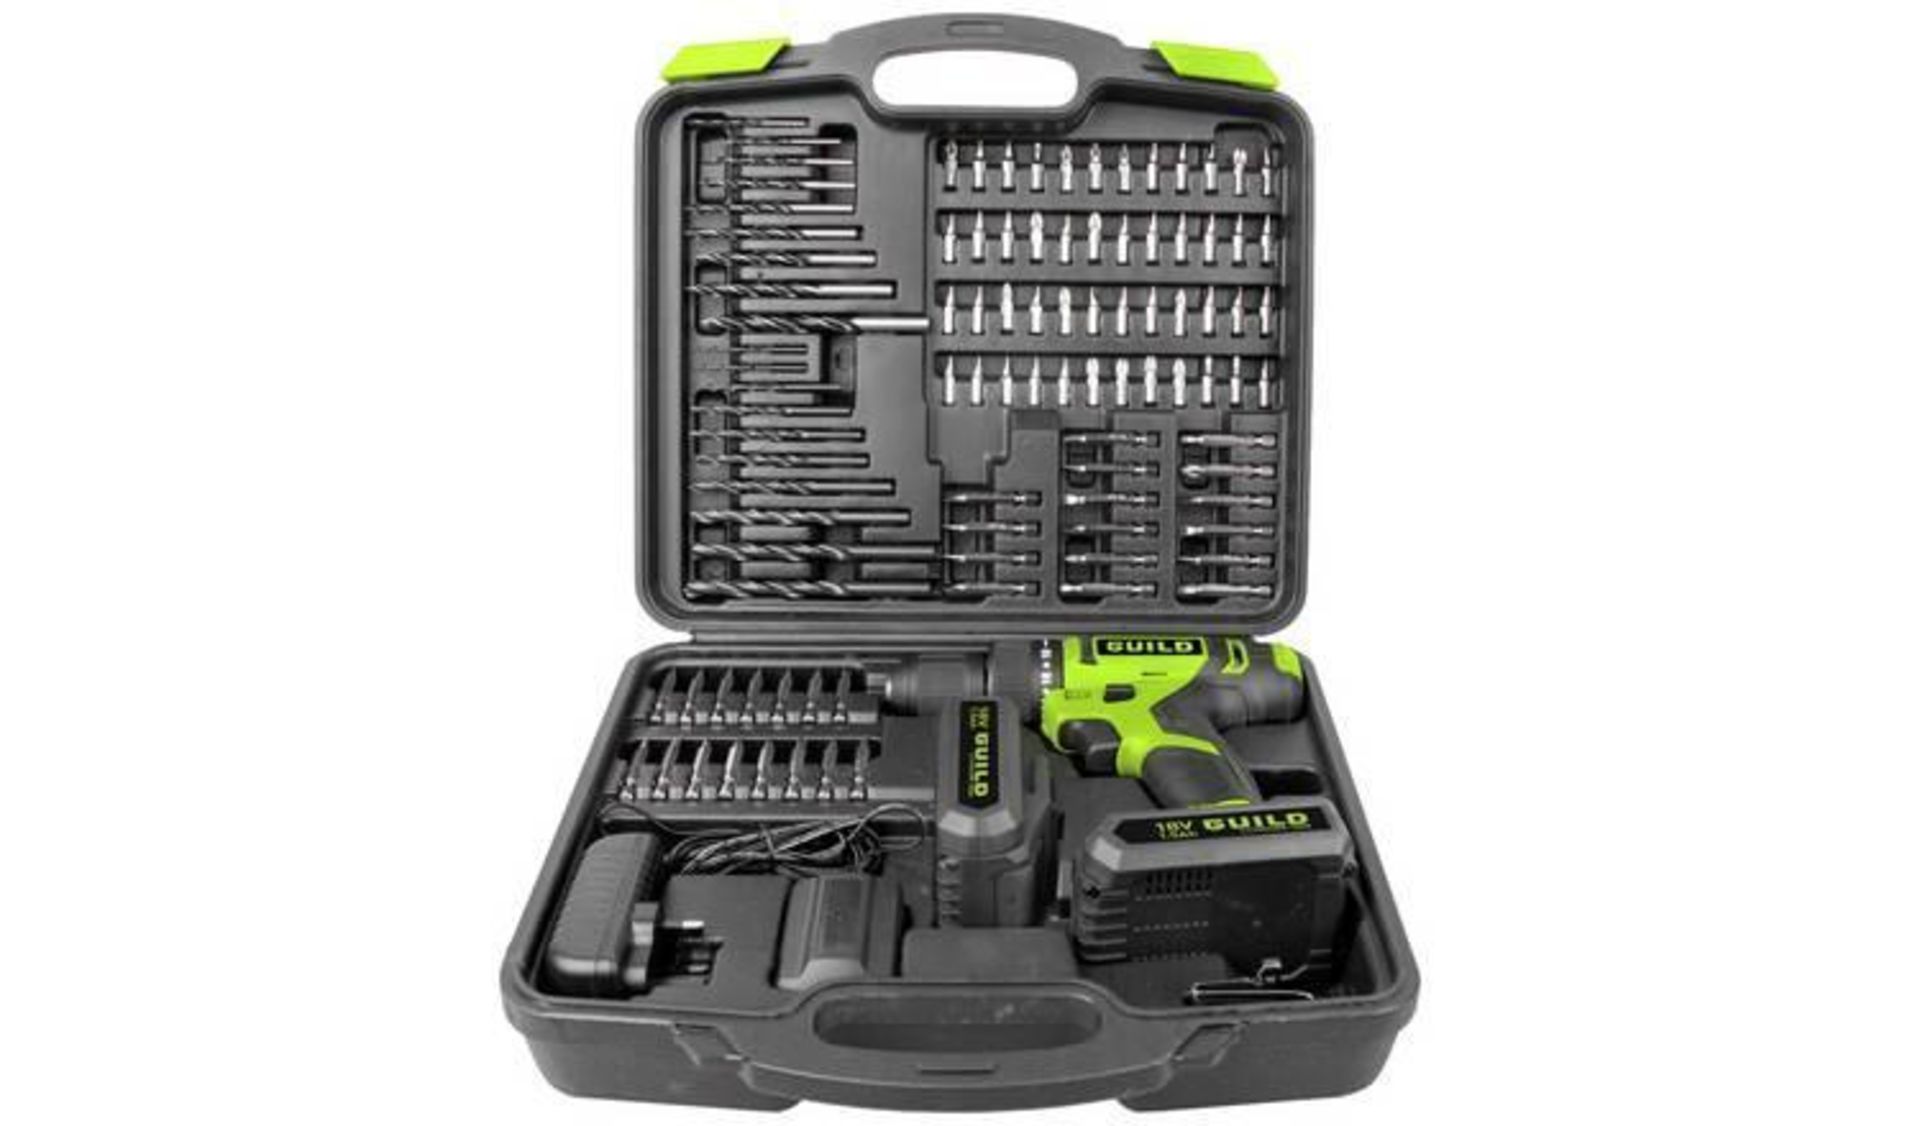 Guild 1.5Ah Combi Drill 2 Batteries and 100 Accessories - £70.00 RRP